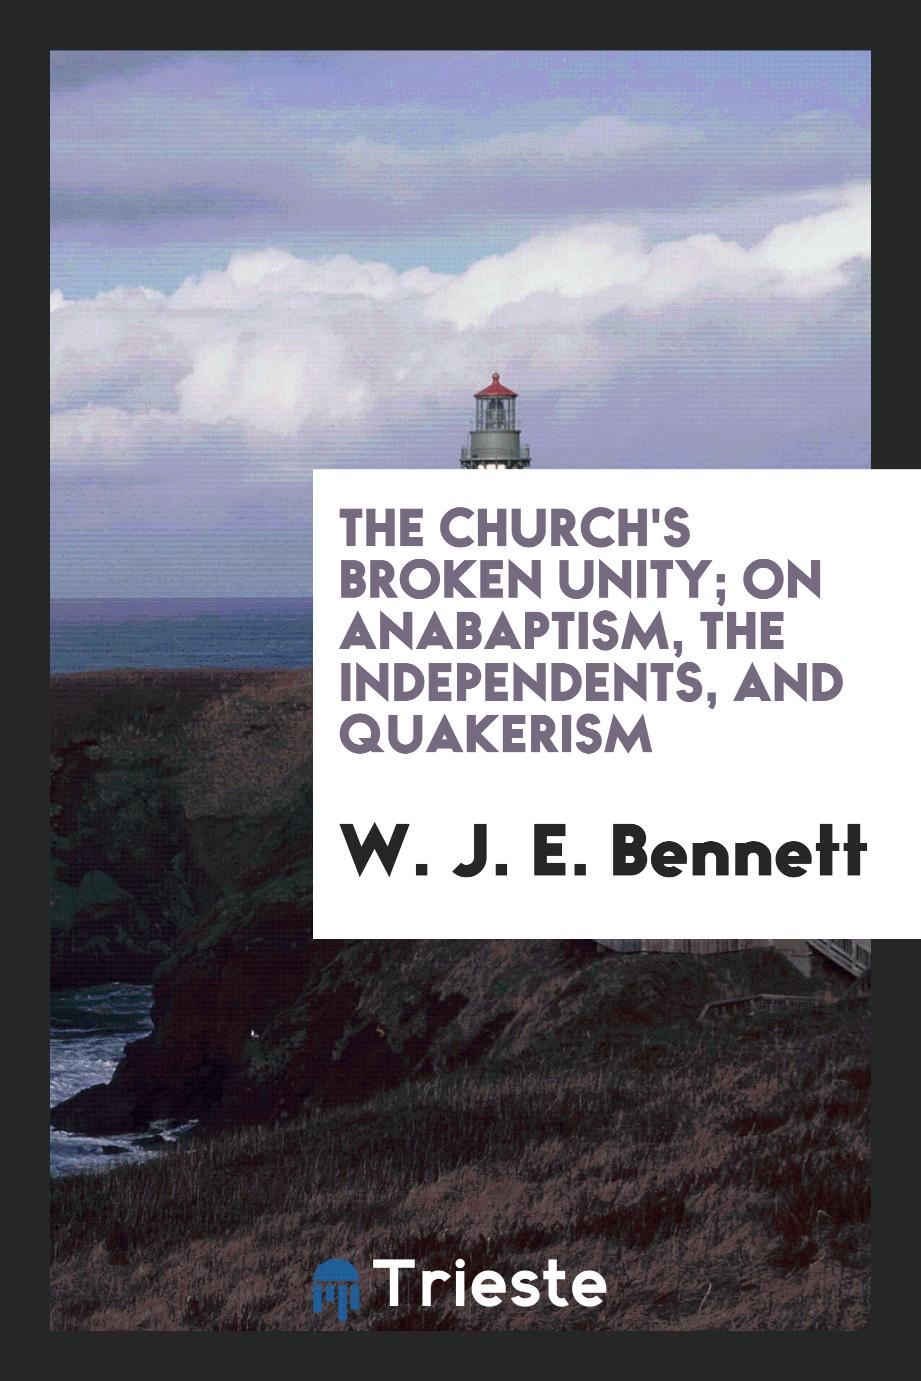 The church's broken unity; on anabaptism, the independents, and quakerism